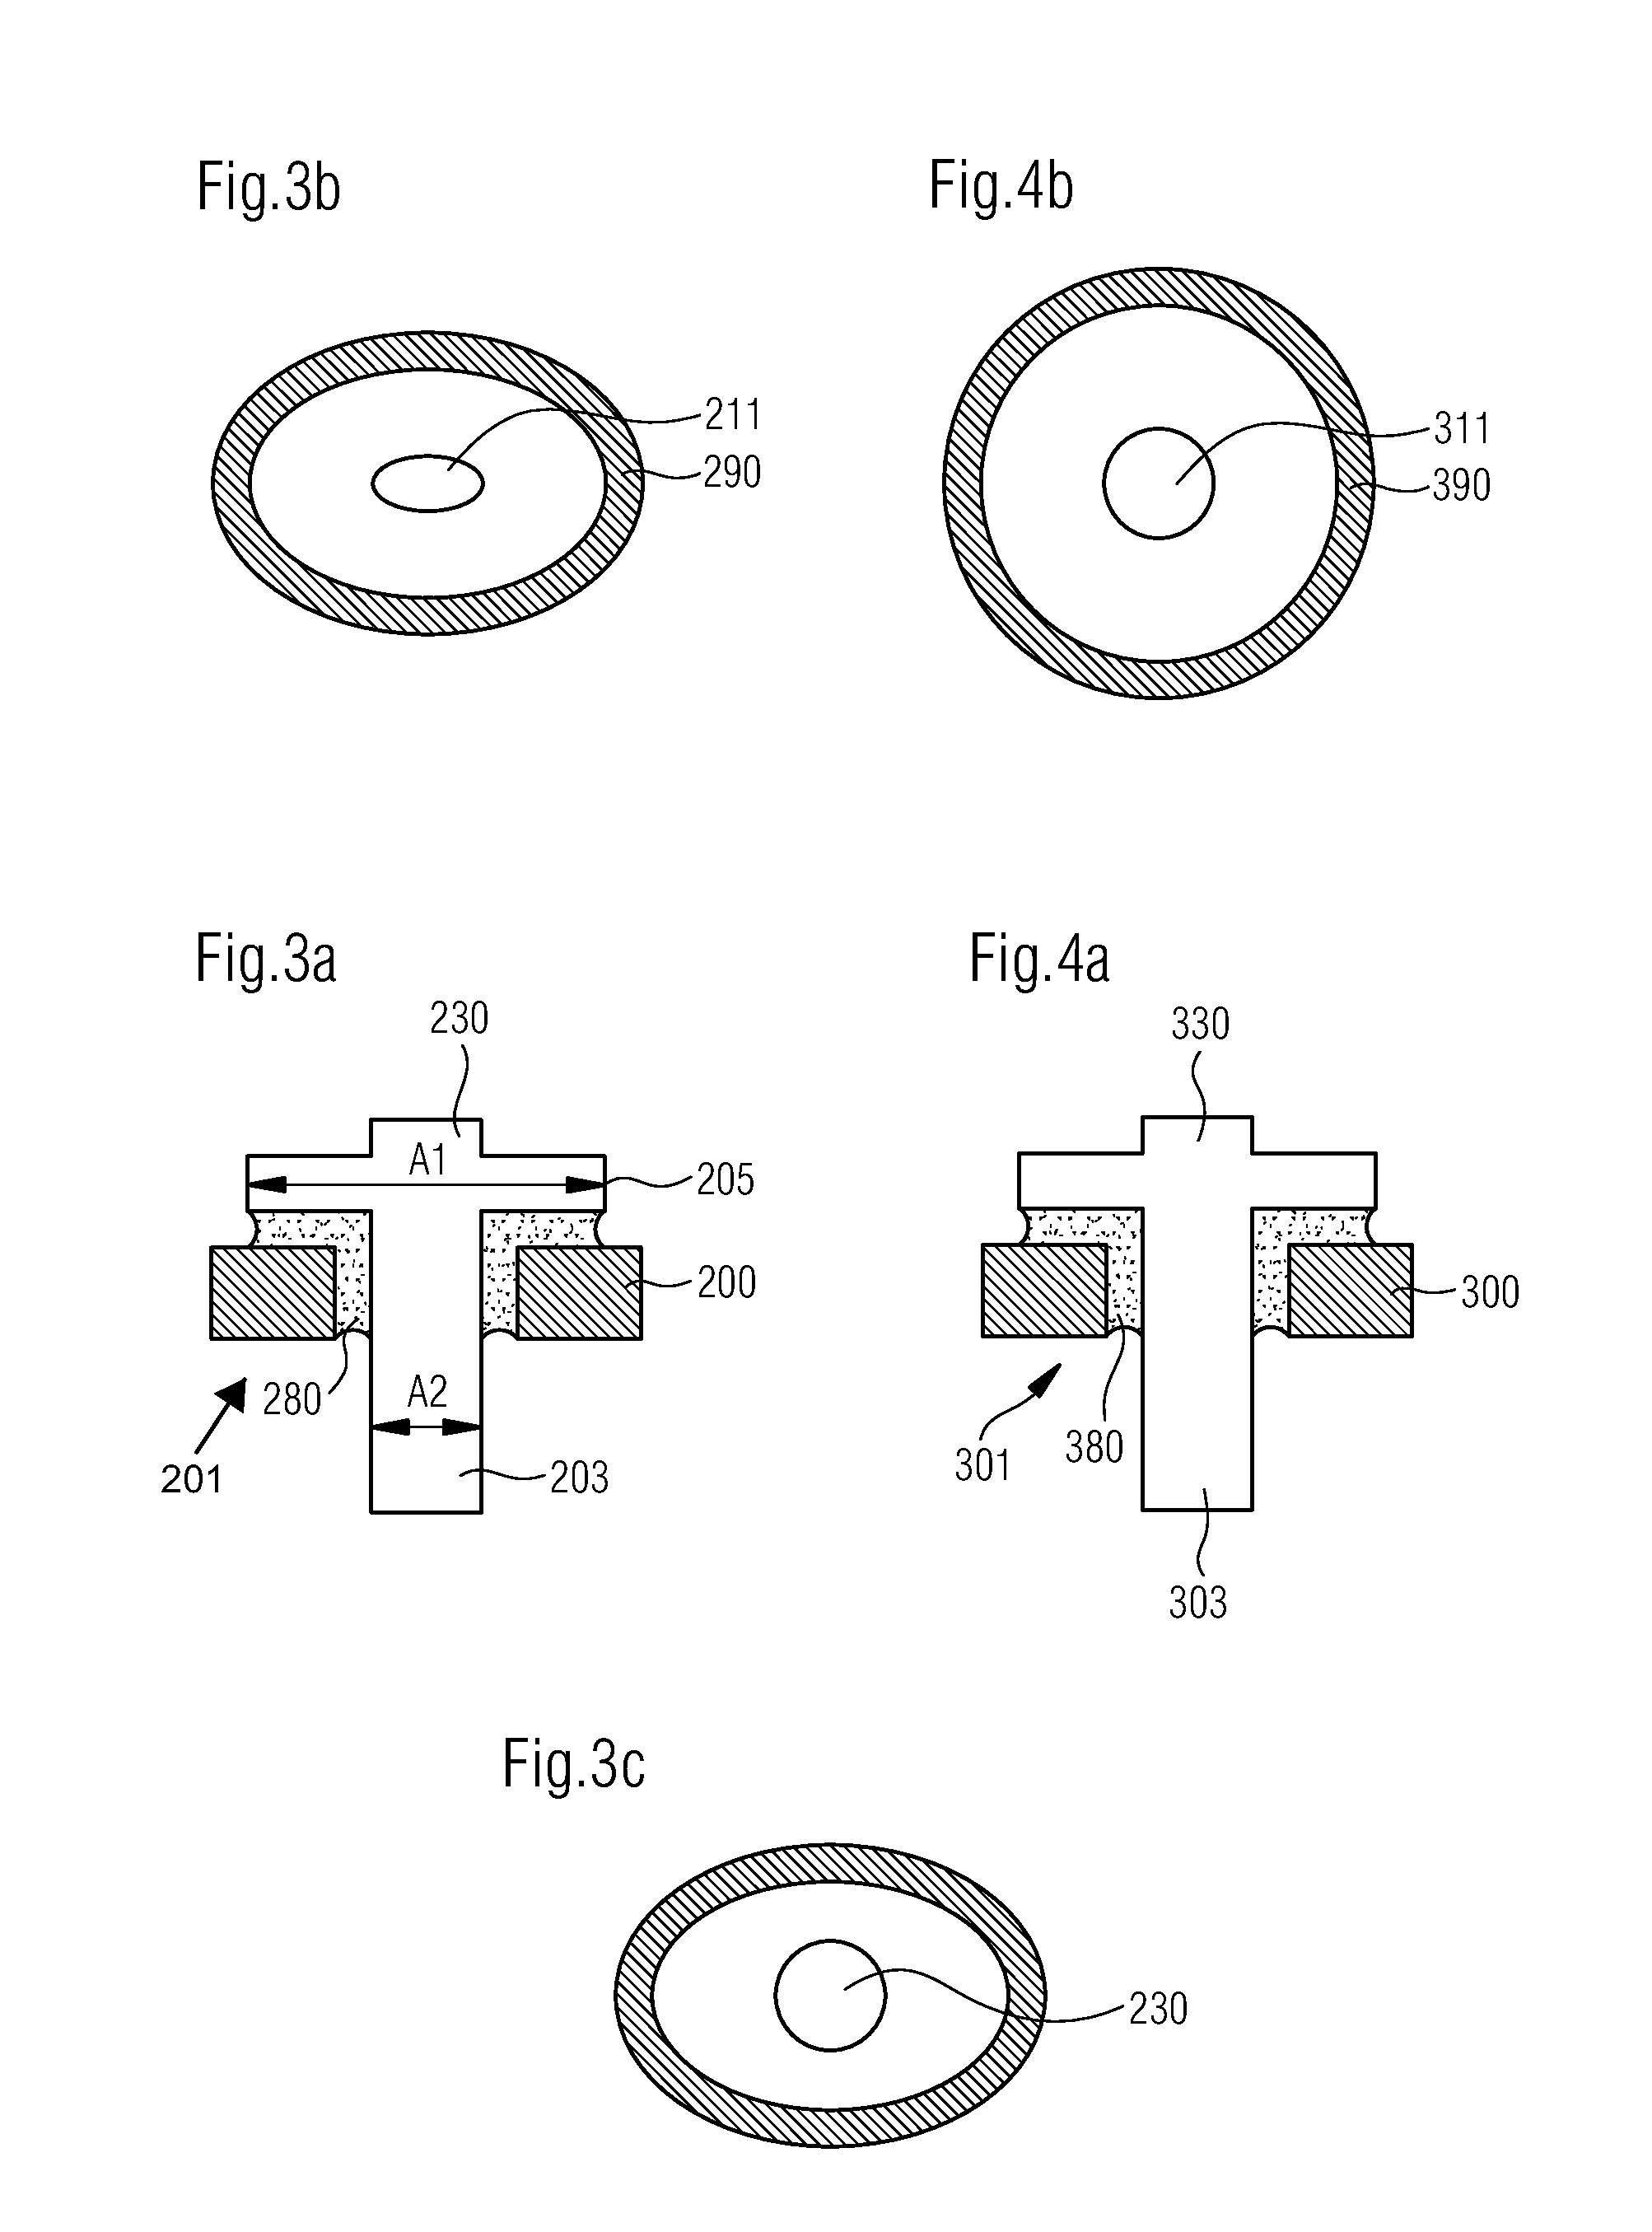 Feed-through component